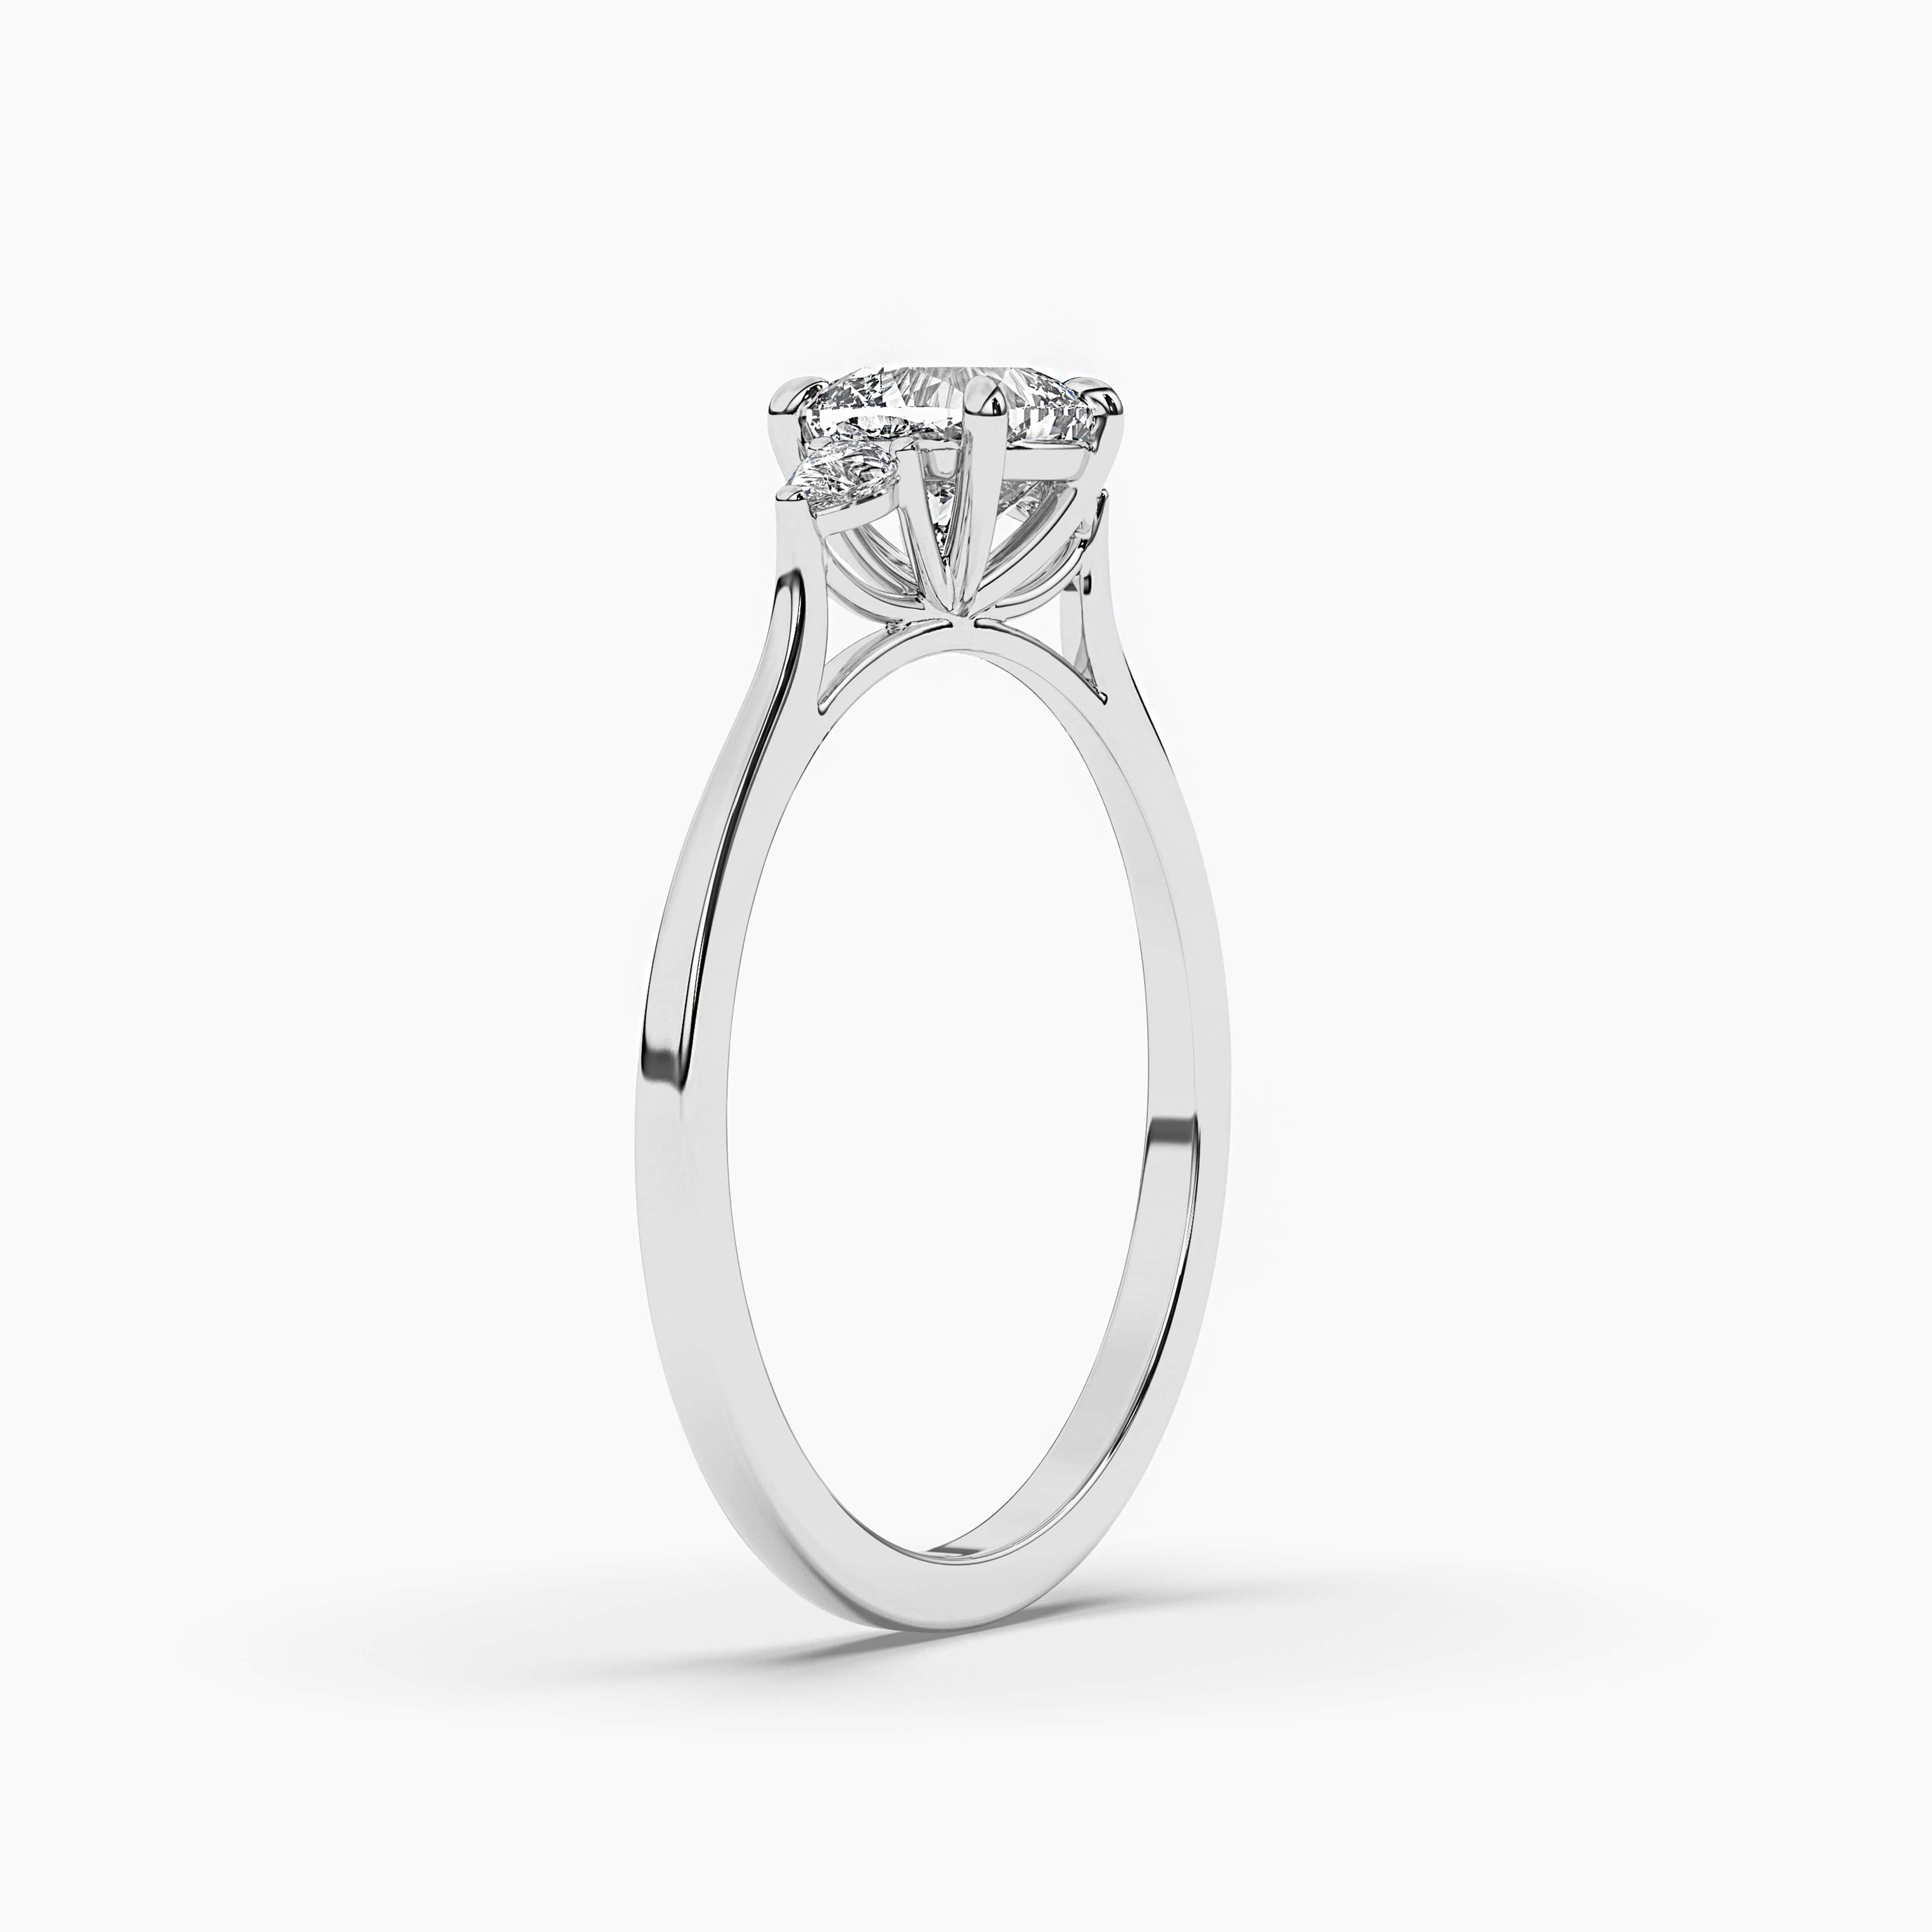 White Gold Cushion Cut Solitaire Ring with Halo Accents Diamonds